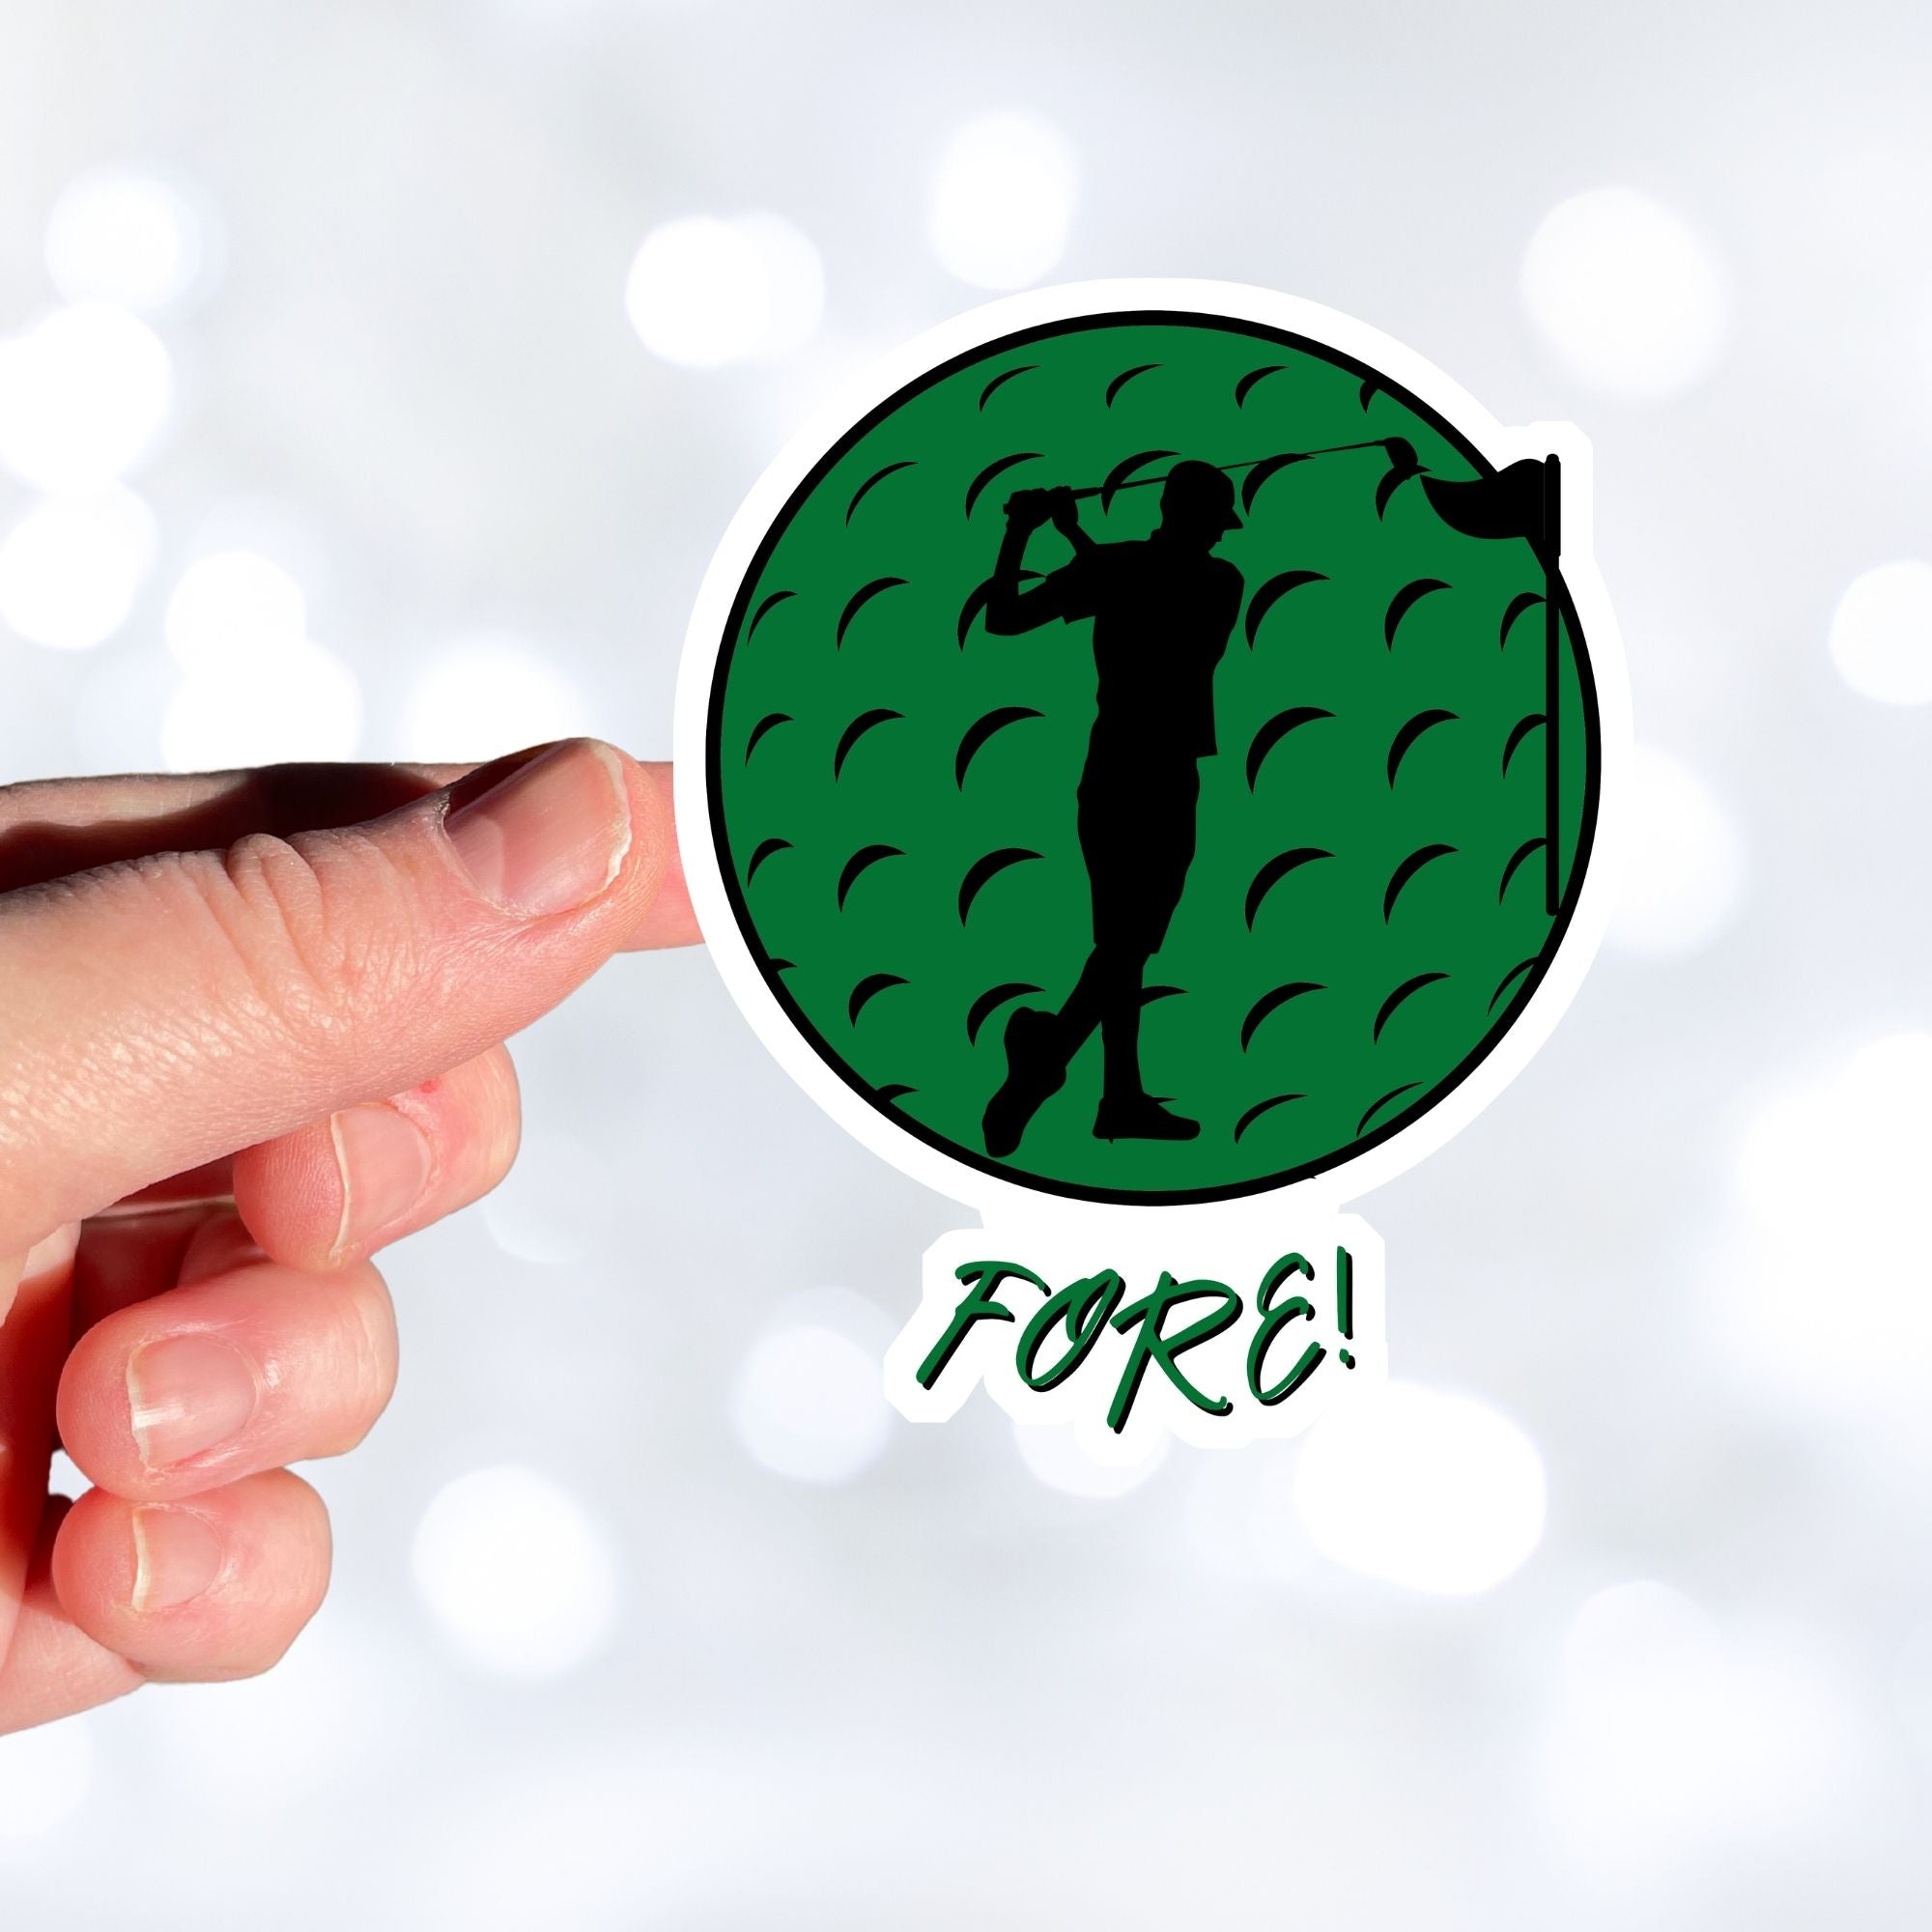 Show your love of golf with this individual die-cut sticker! This sticker shows the silhouette of a golfer about to swing, on a green golf ball background, with the word "Fore!" below.  This image is of a hand holding the golf sticker.